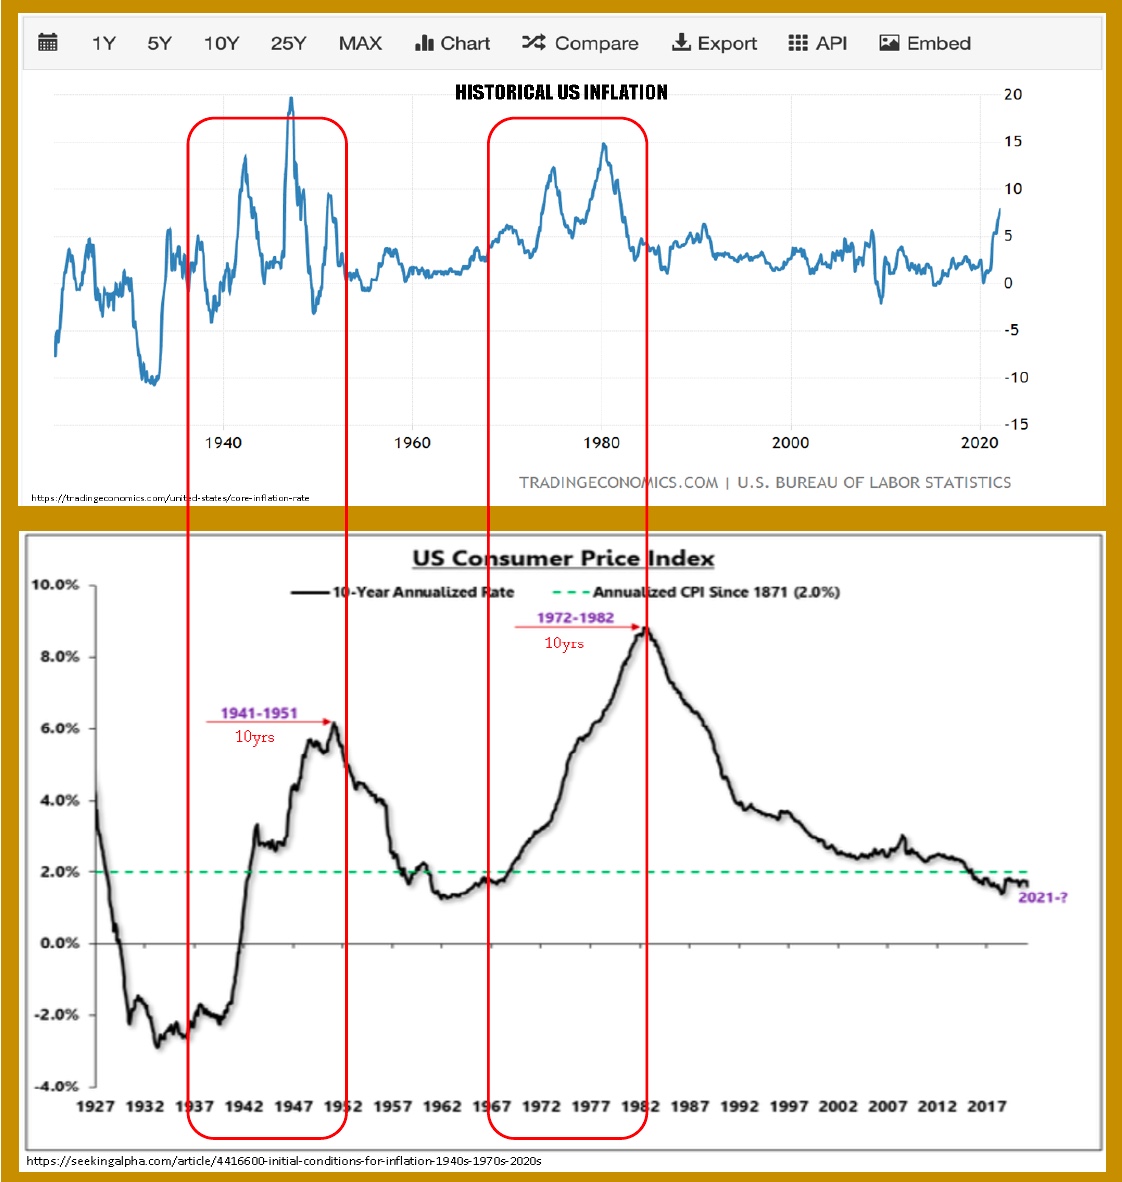 Historical US inflation cycles